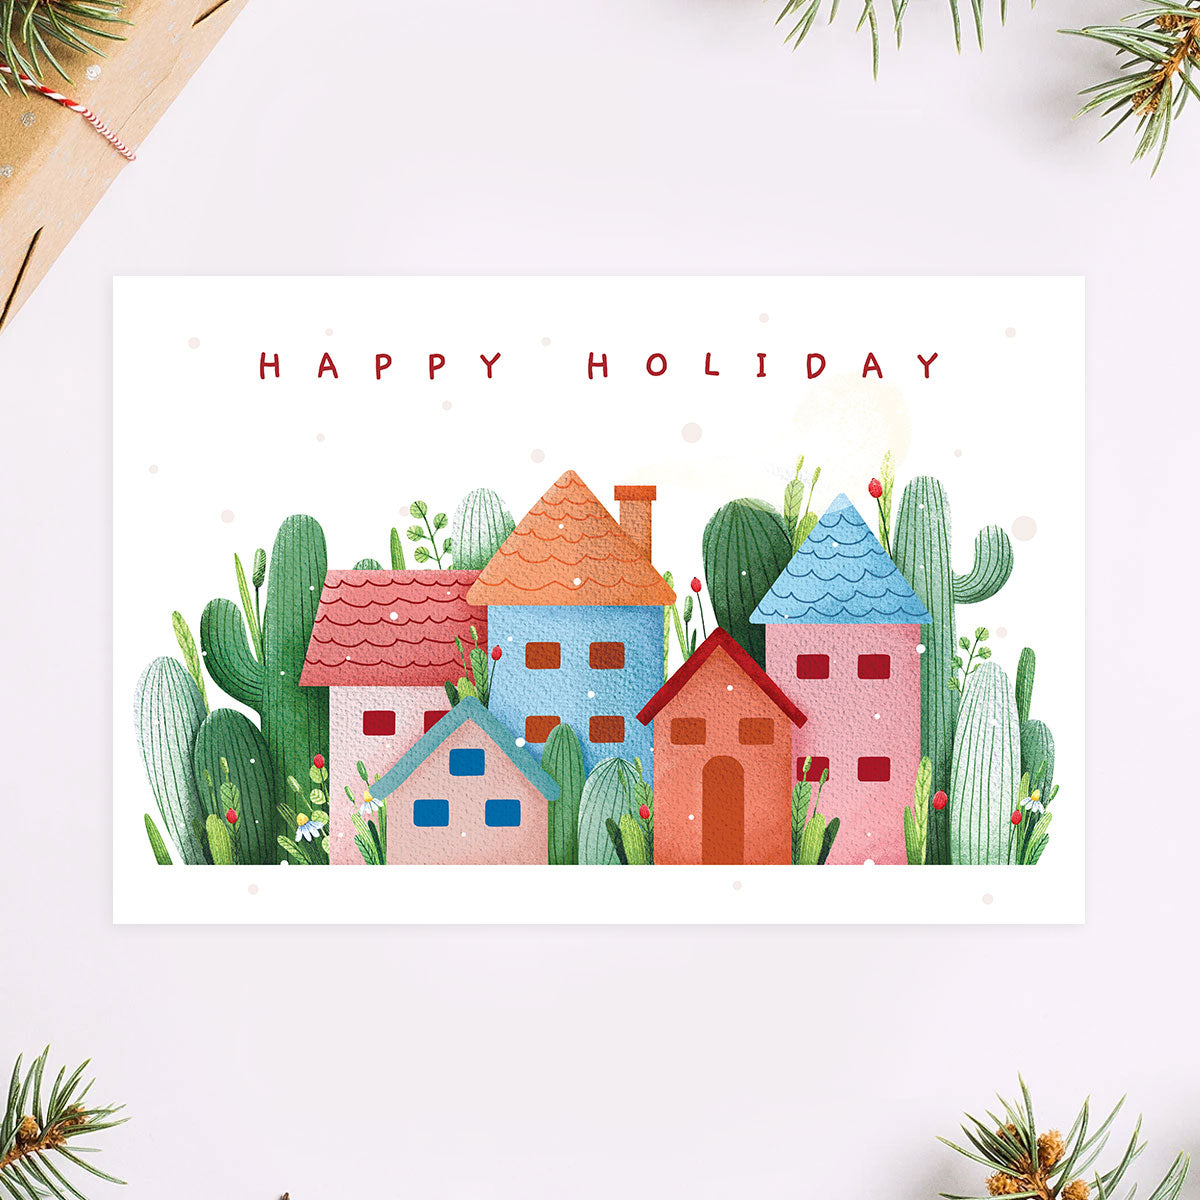 Happy Holiday Card for sale, Succulent Happy Holiday Card for sale, Cactus Greeting Card, Succulents Greeting Card, Succulents Gift Ideas, Happy Holiday Cactus Card, Happy Holiday Succulents Greeting Card